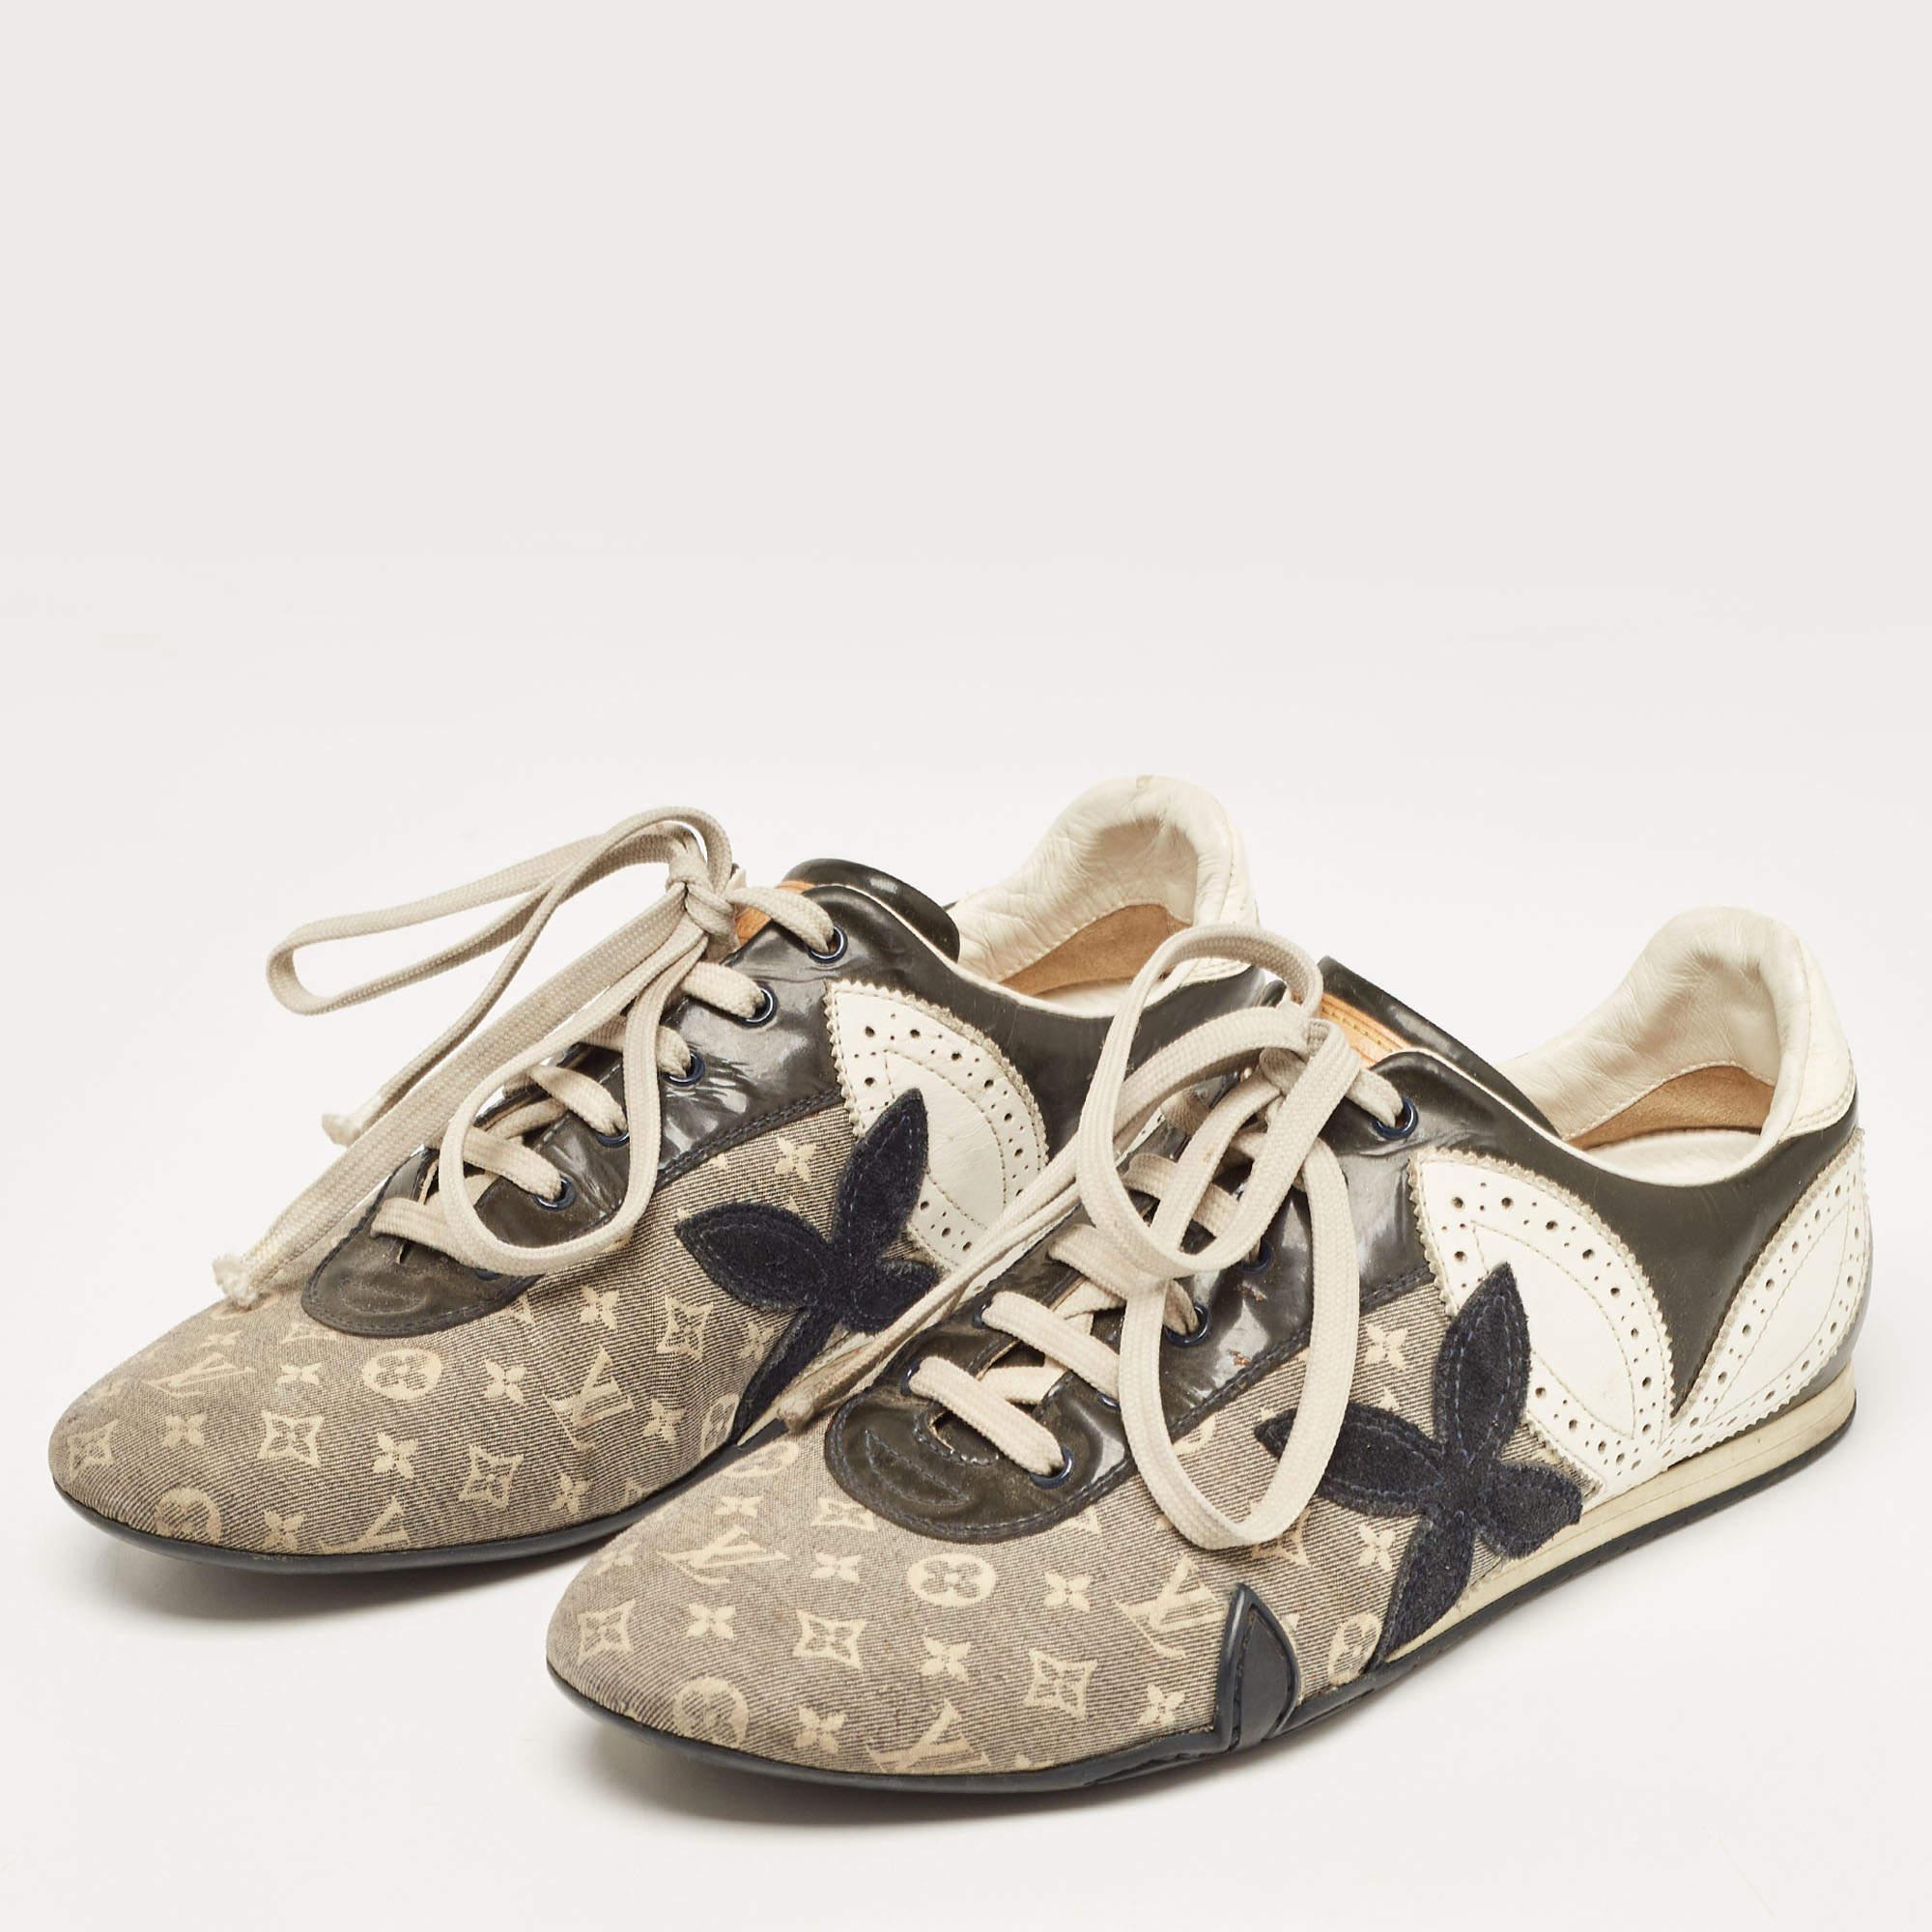 Coming in a classic low-top silhouette, these Louis Vuitton sneakers are a seamless combination of luxury, comfort, and style. They are made from patent leather, monogram canvas, and suede in multiple shades. These sneakers are designed with